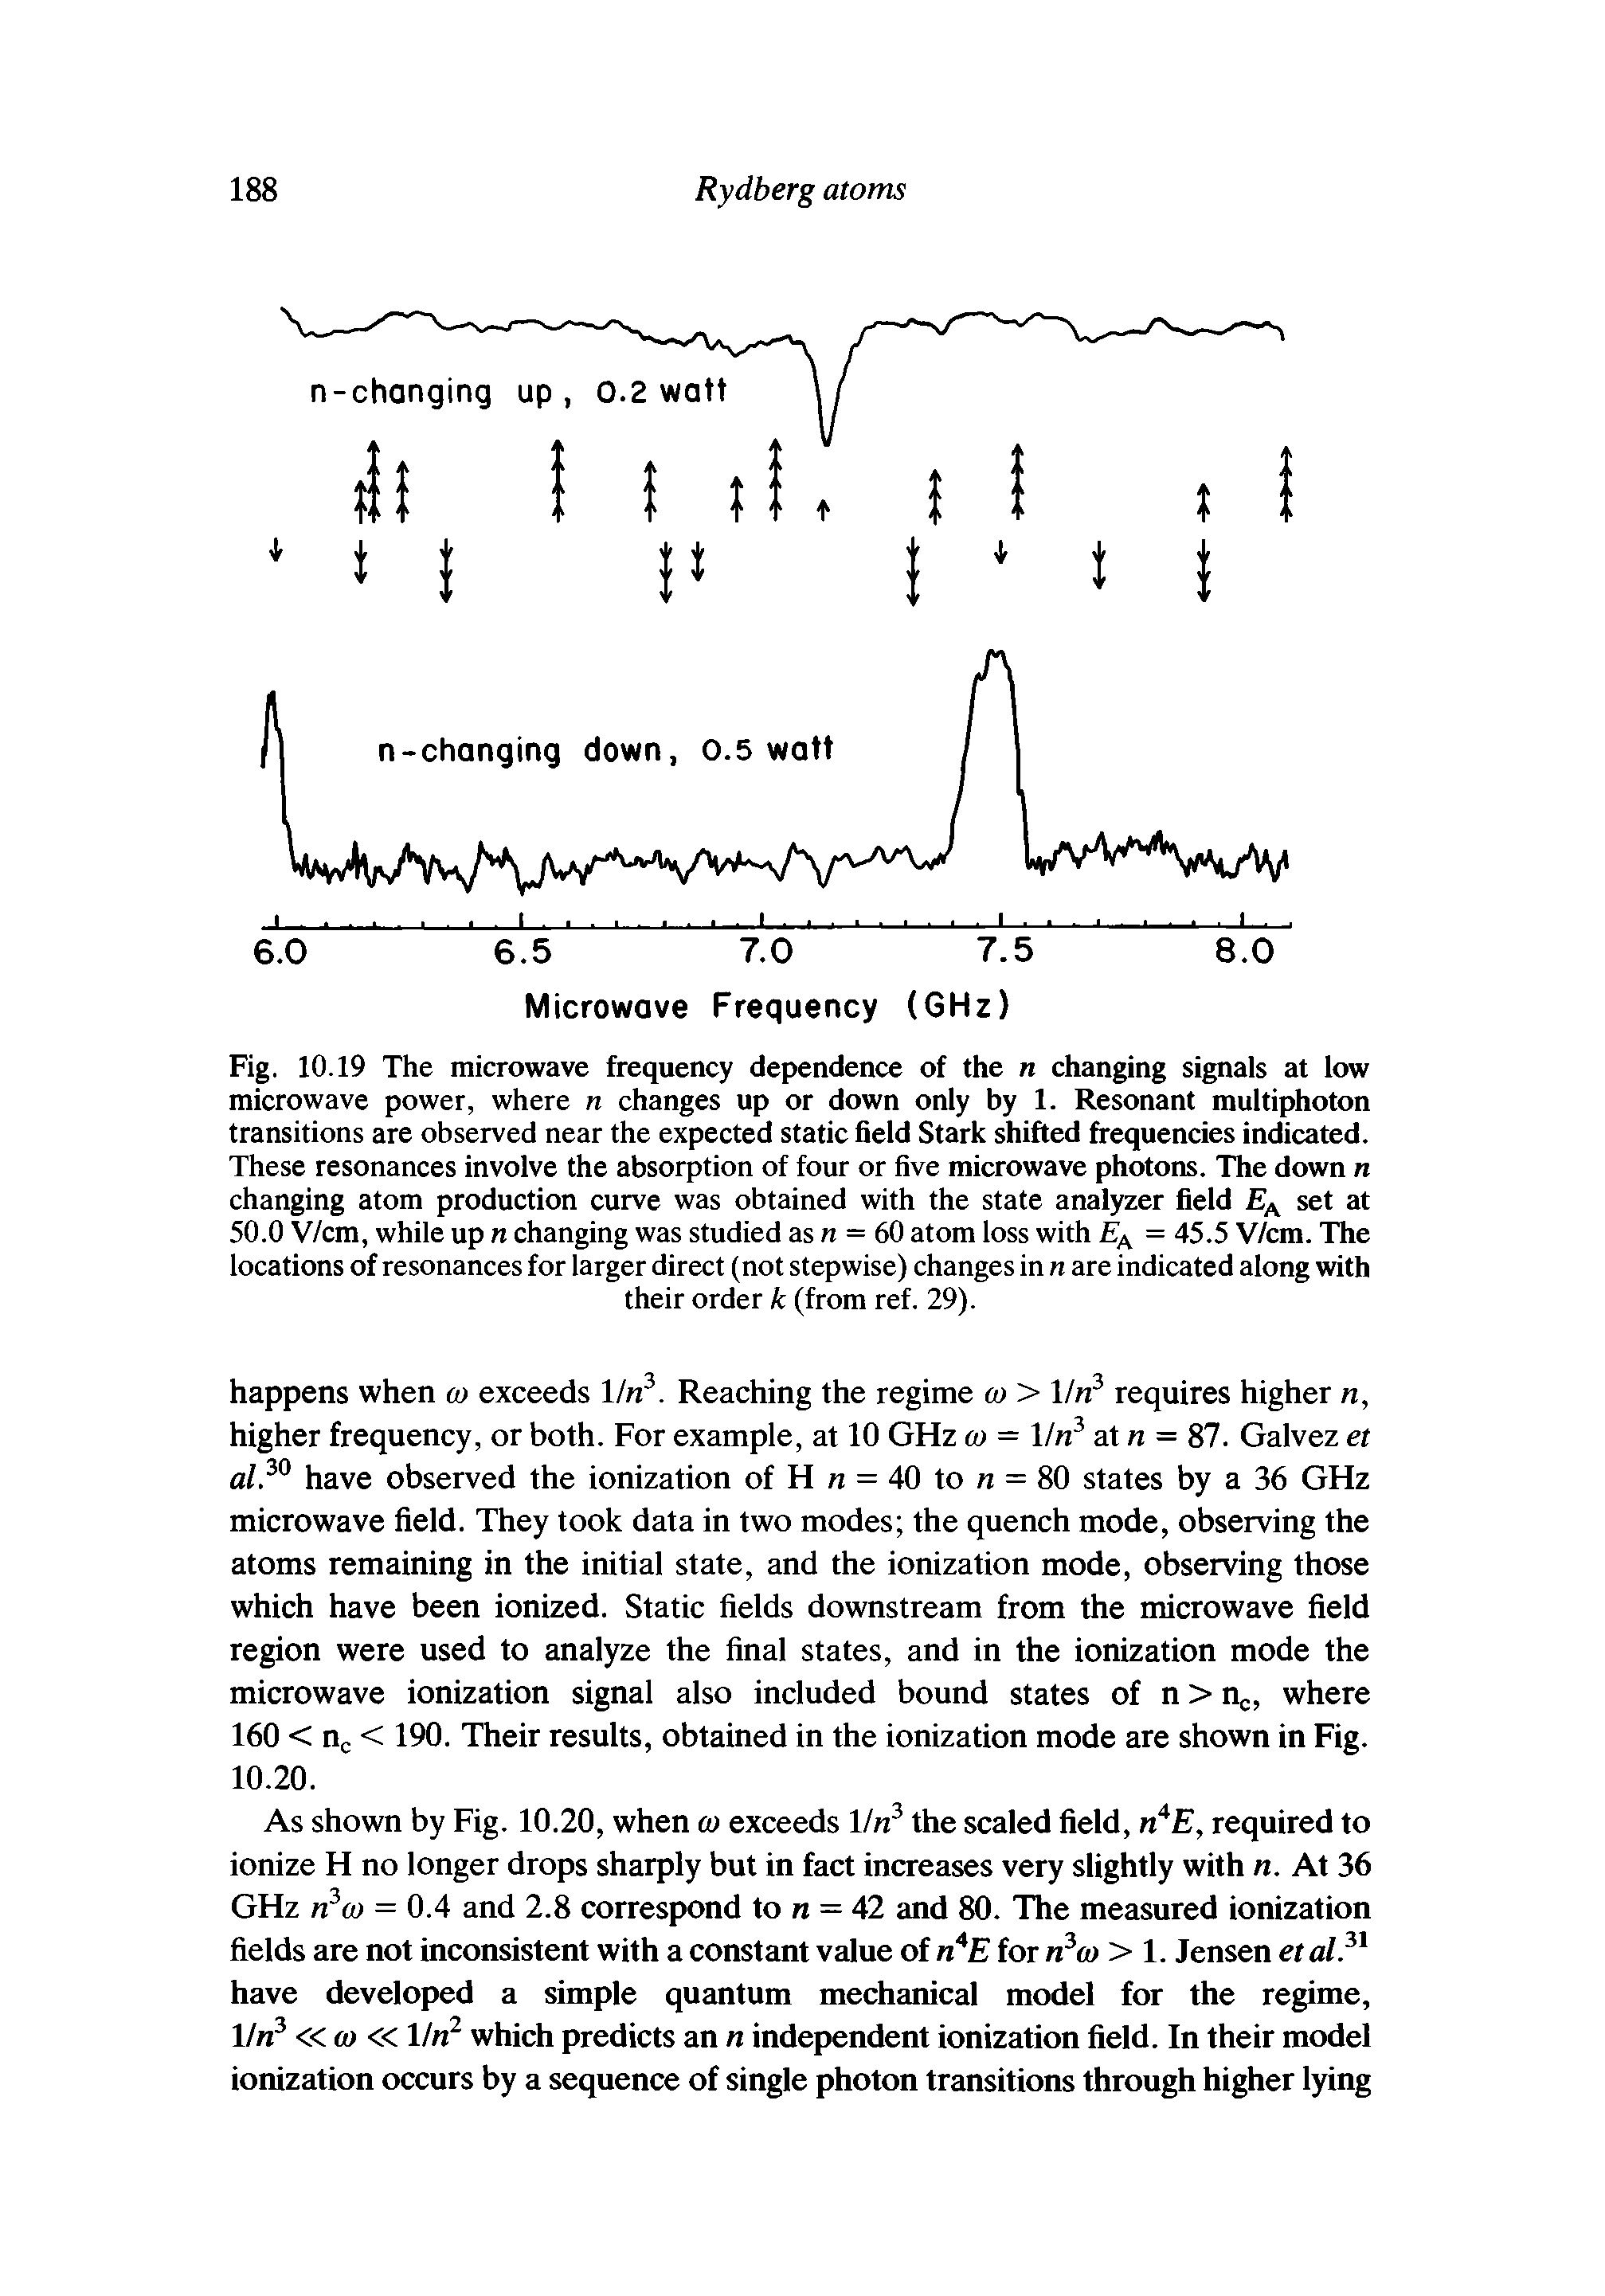 Fig. 10.19 The microwave frequency dependence of the n changing signals at low microwave power, where n changes up or down only by 1. Resonant multiphoton transitions are observed near the expected static field Stark shifted frequencies indicated. These resonances involve the absorption of four or five microwave photons. The down n changing atom production curve was obtained with the state analyzer field EA set at 50.0 V/cm, while up n changing was studied as n = 60 atom loss with EA = 45.5 V/cm. The locations of resonances for larger direct (not stepwise) changes in n are indicated along with...